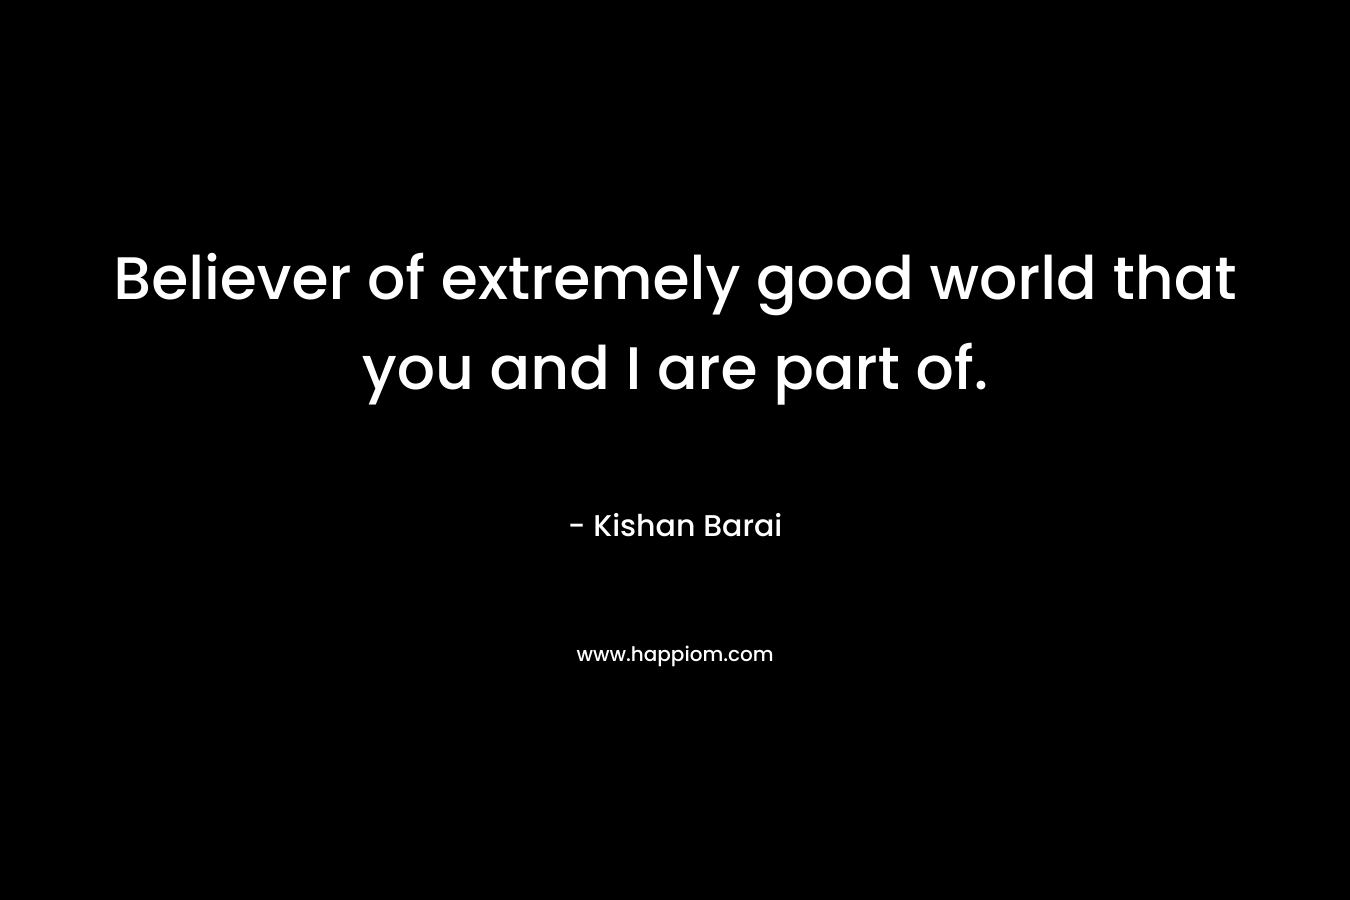 Believer of extremely good world that you and I are part of. – Kishan Barai